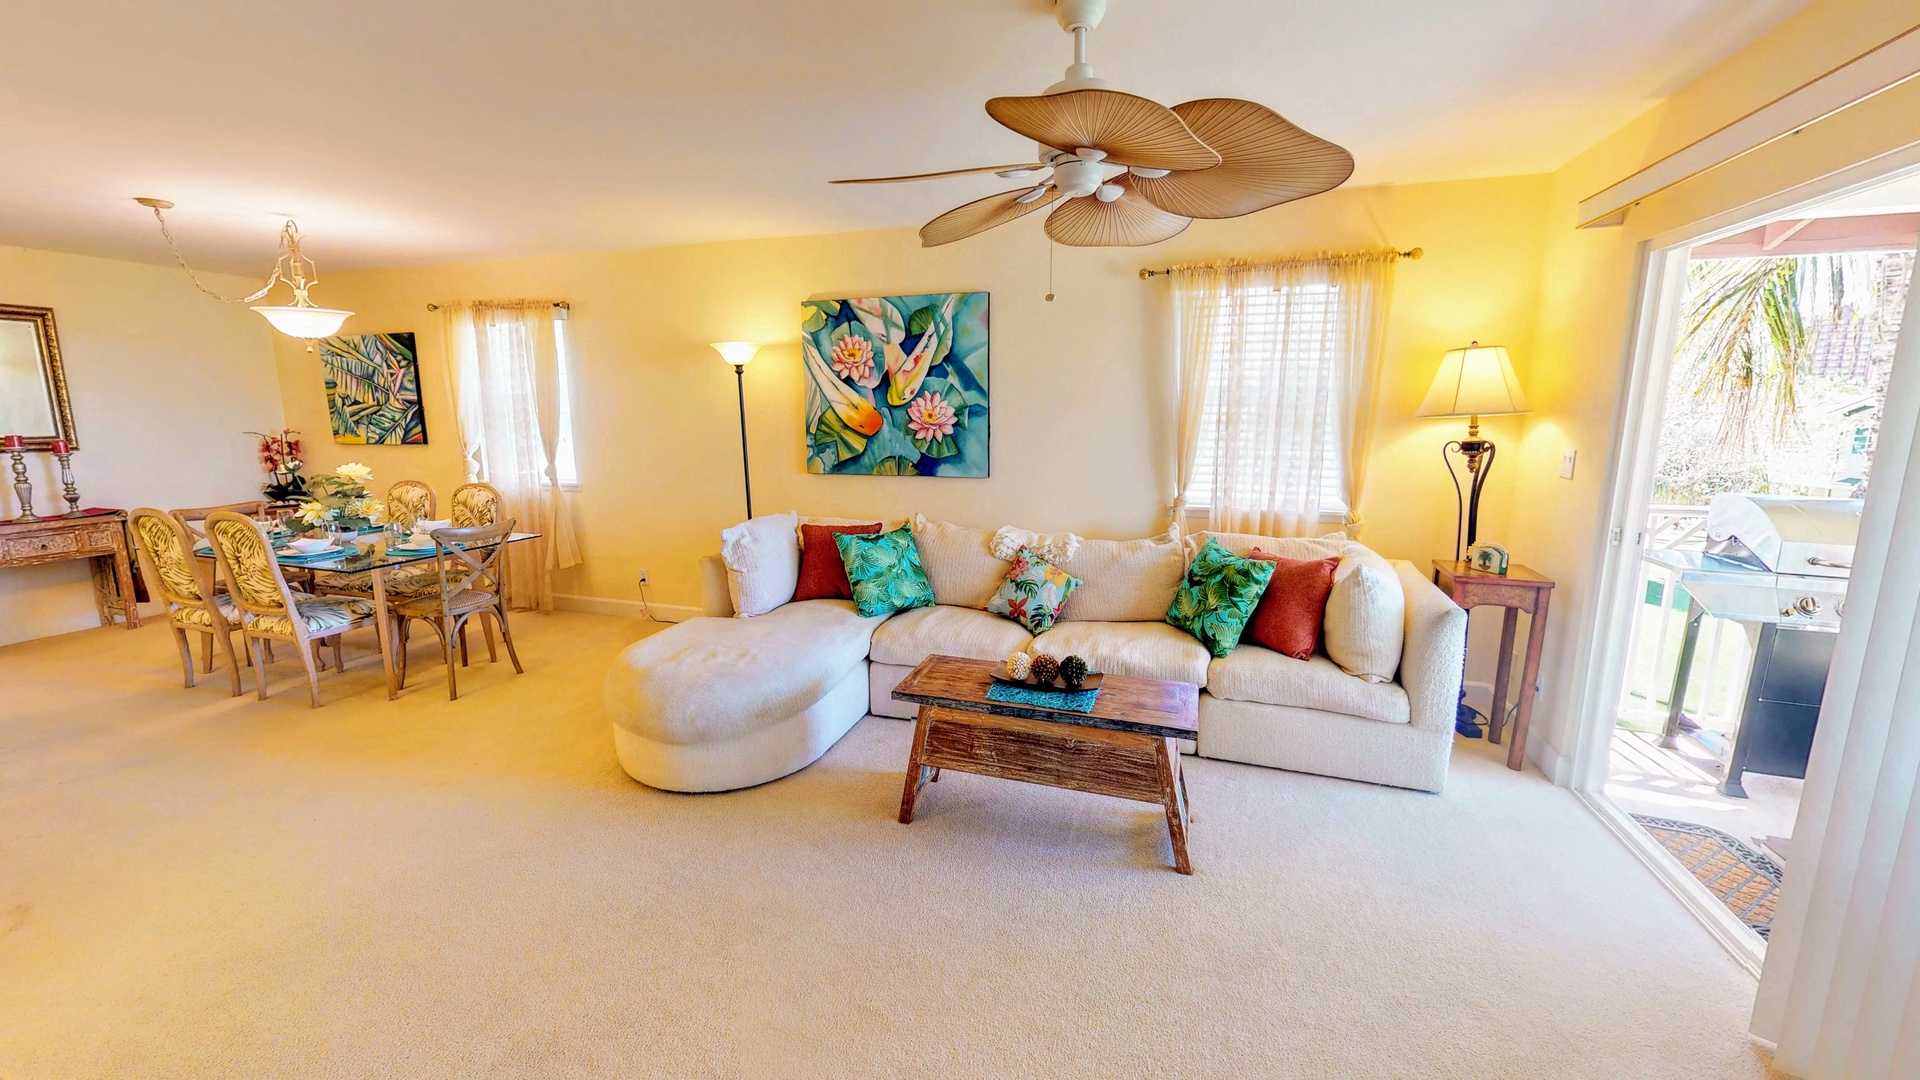 Kapolei Vacation Rentals, Ko Olina Kai 1029B - Curl up with a book or start up a game night.